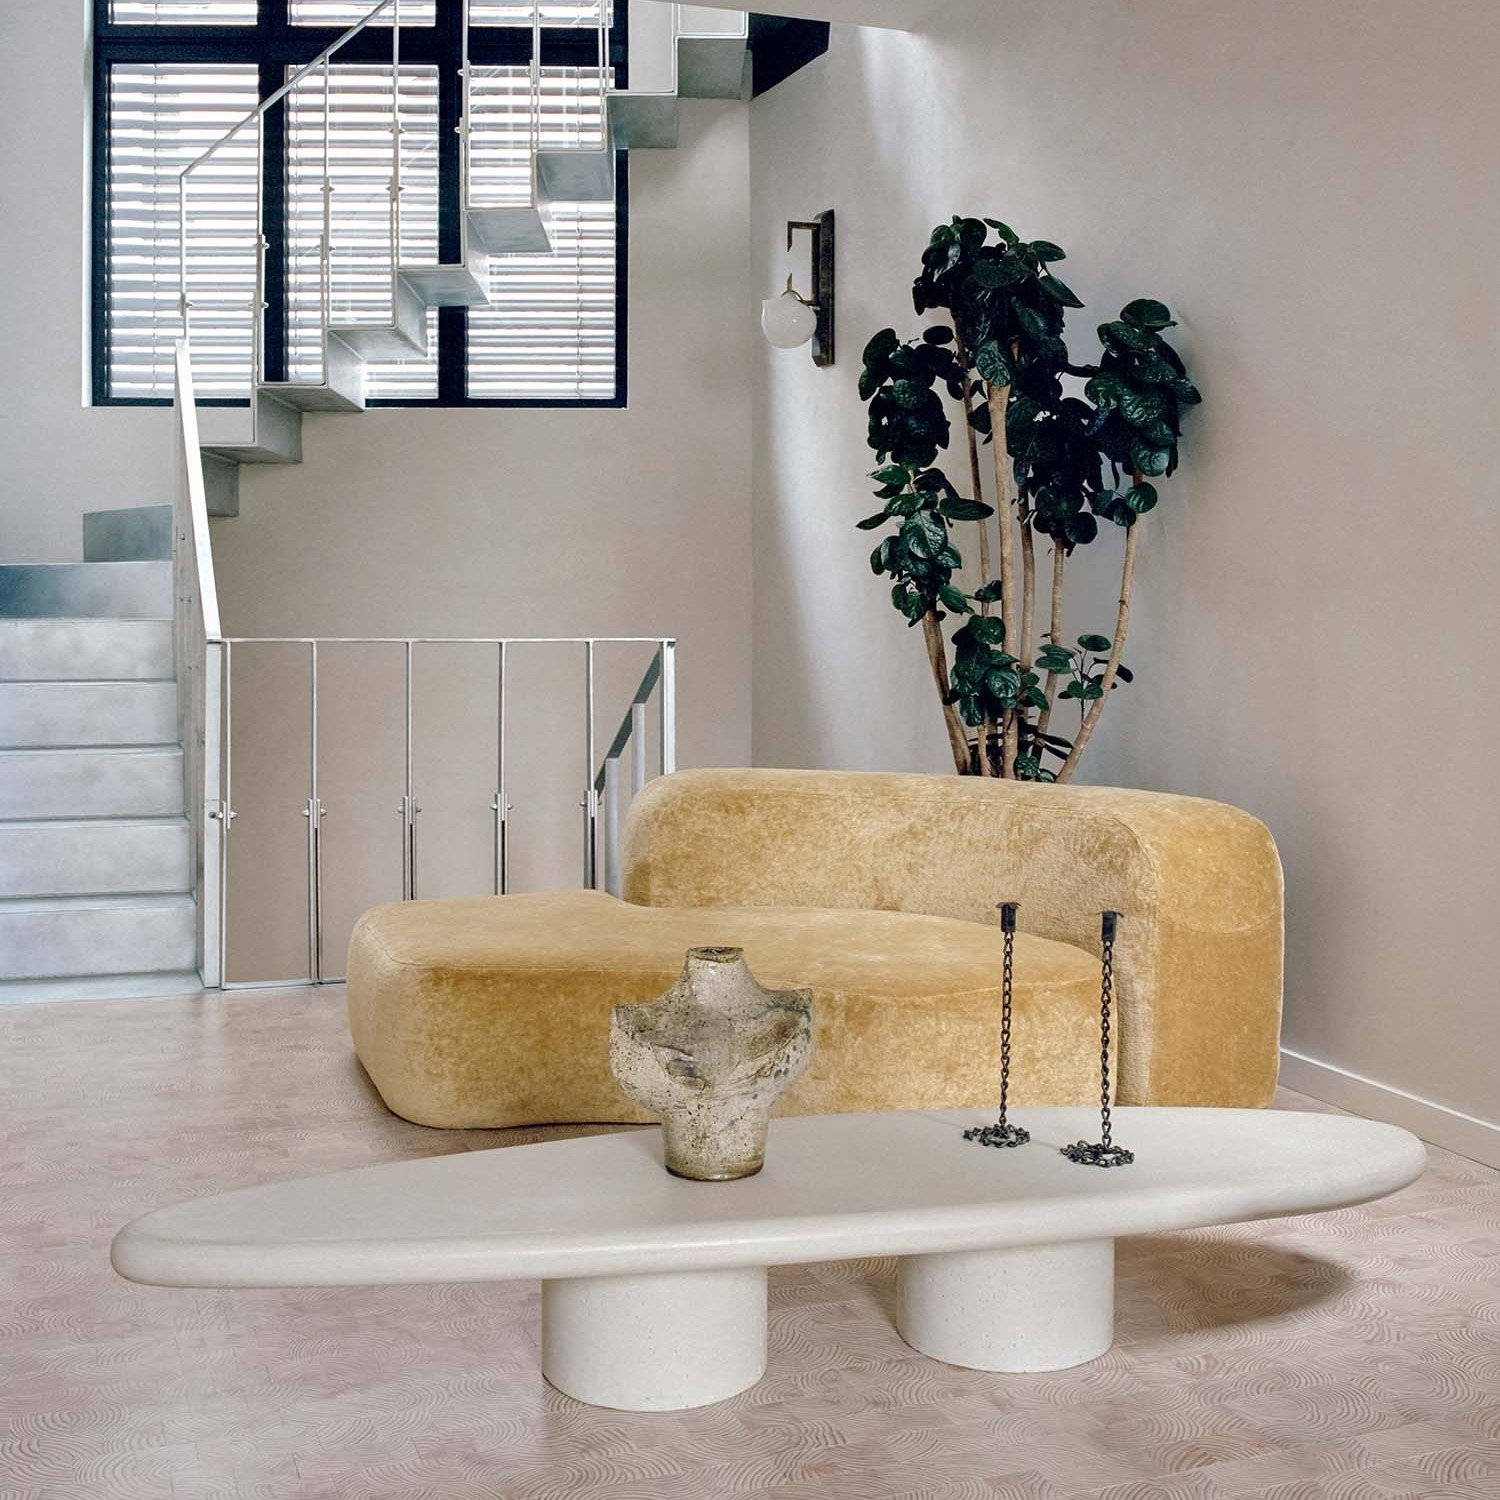 A young art collector’s glamorous home on the Parisian outskirts